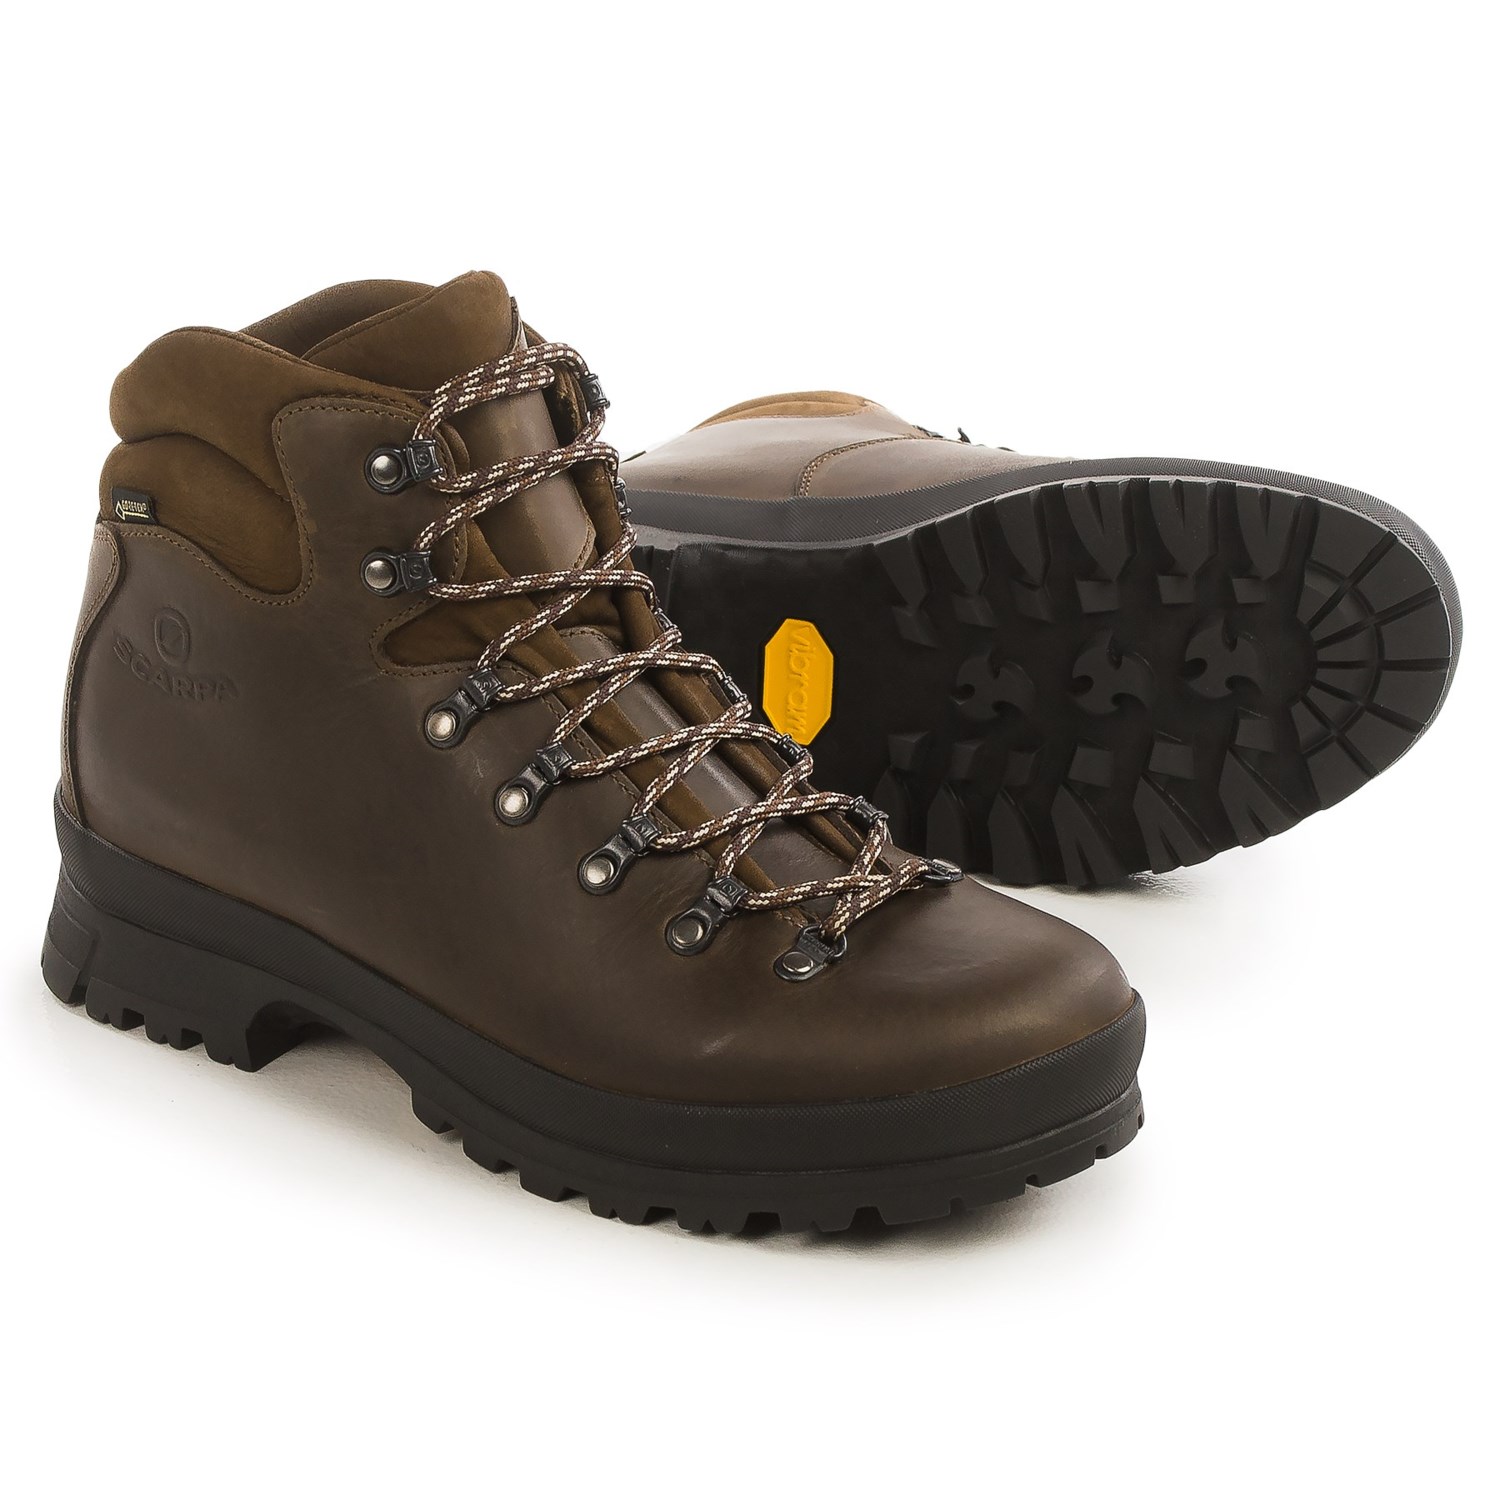 Scarpa Ranger Gore-Tex® Hiking Boots (For Men) - Save 39%